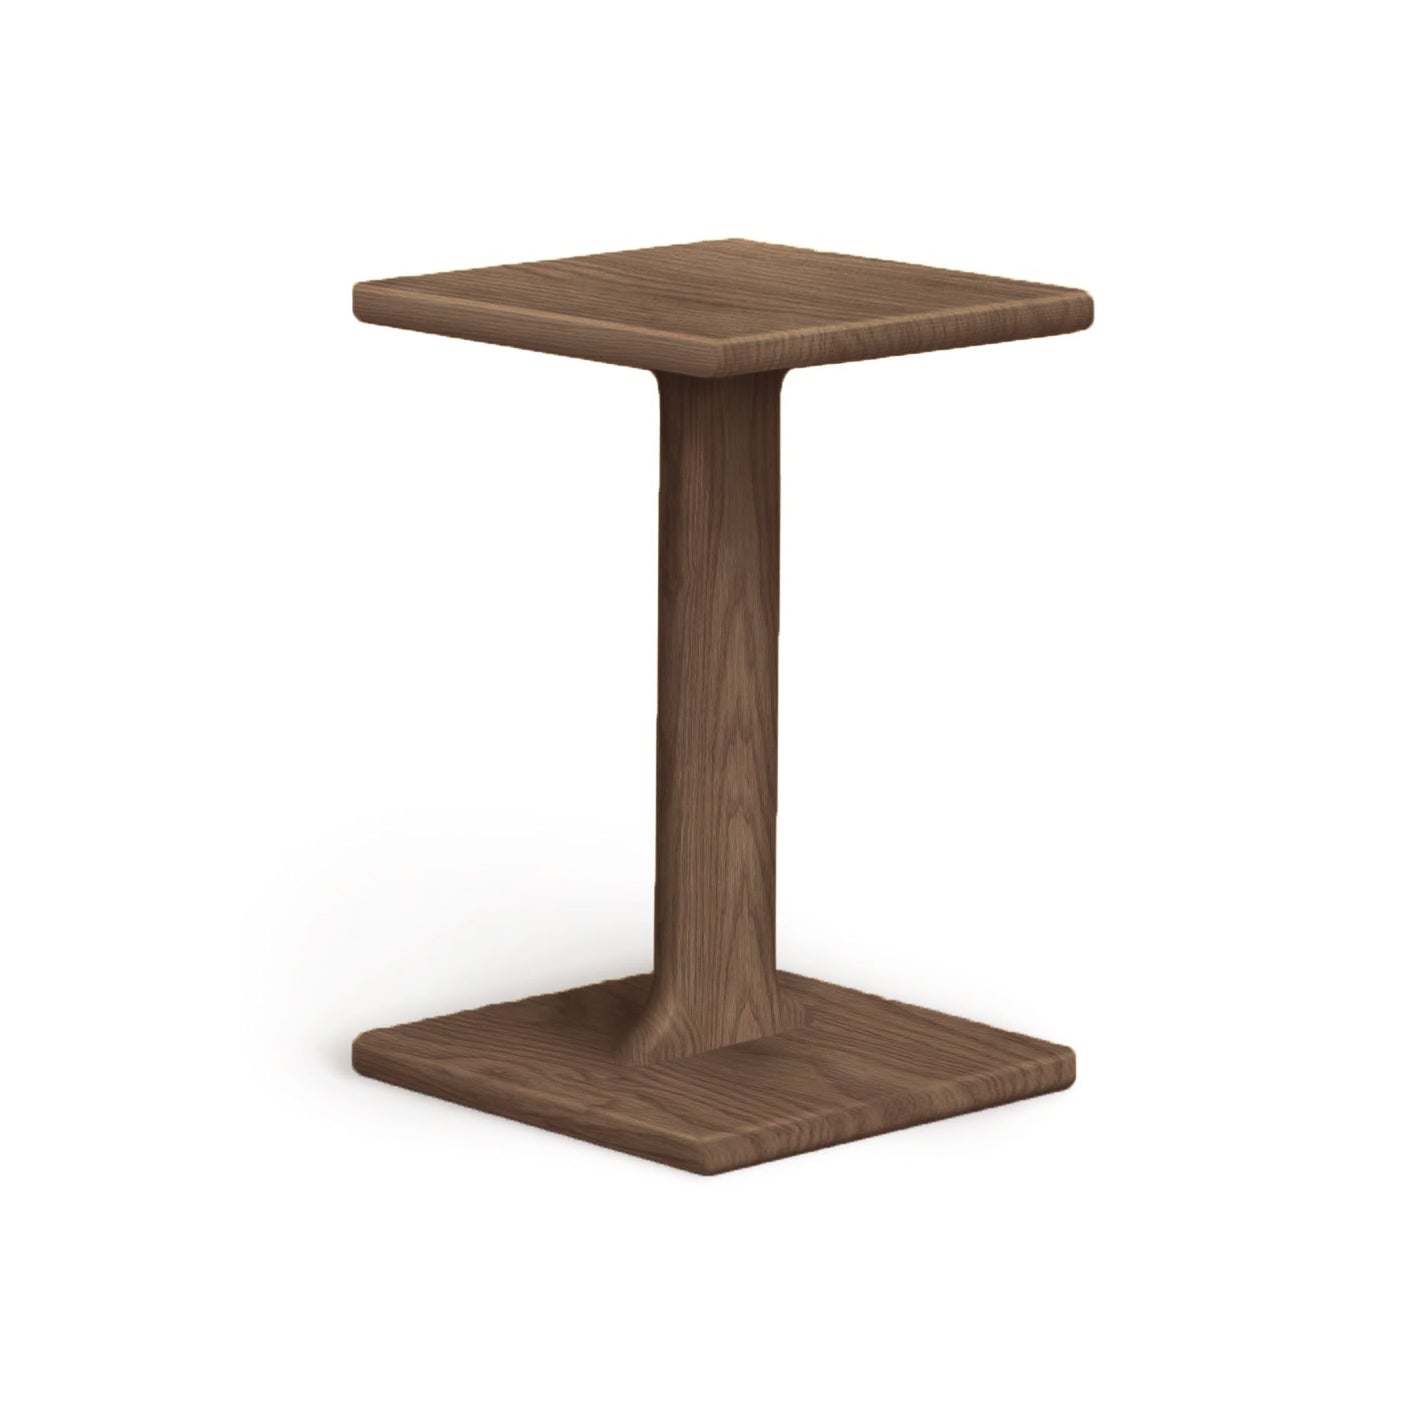 The Copeland Furniture Sierra Chair Table is a small wooden occasional table with a square base.